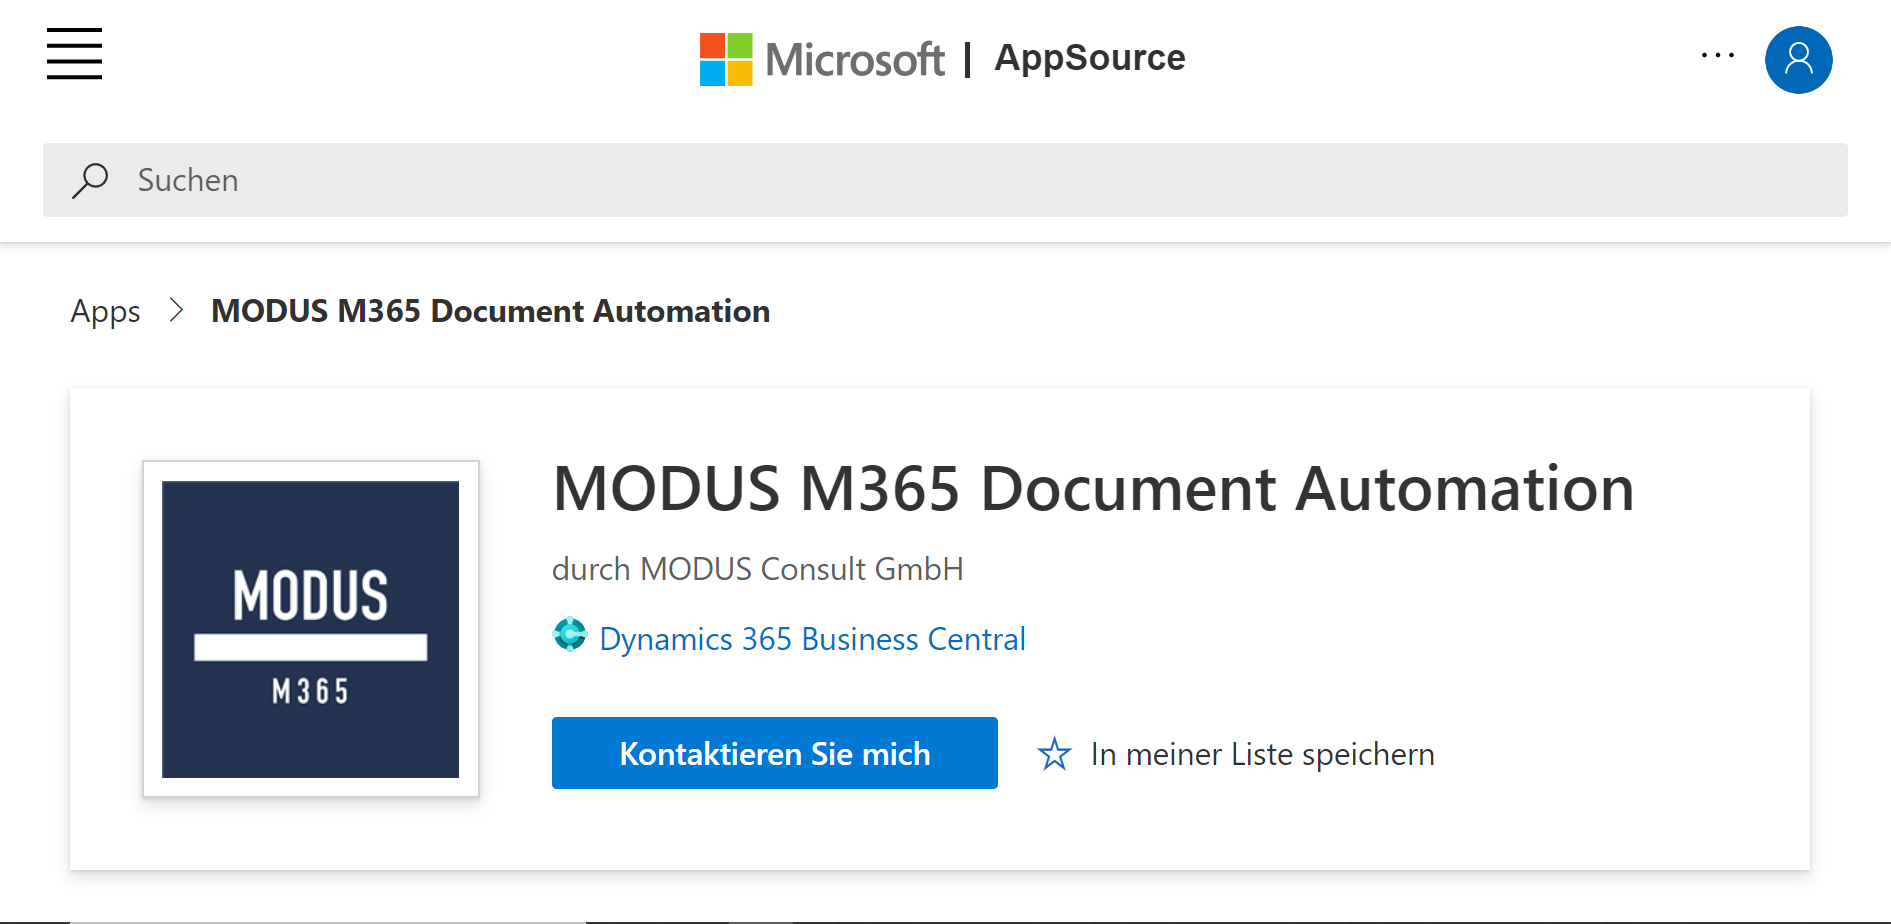 dox42 in der Cloud: Dynamics 365 for Business Central Online in der Microsoft AppSource